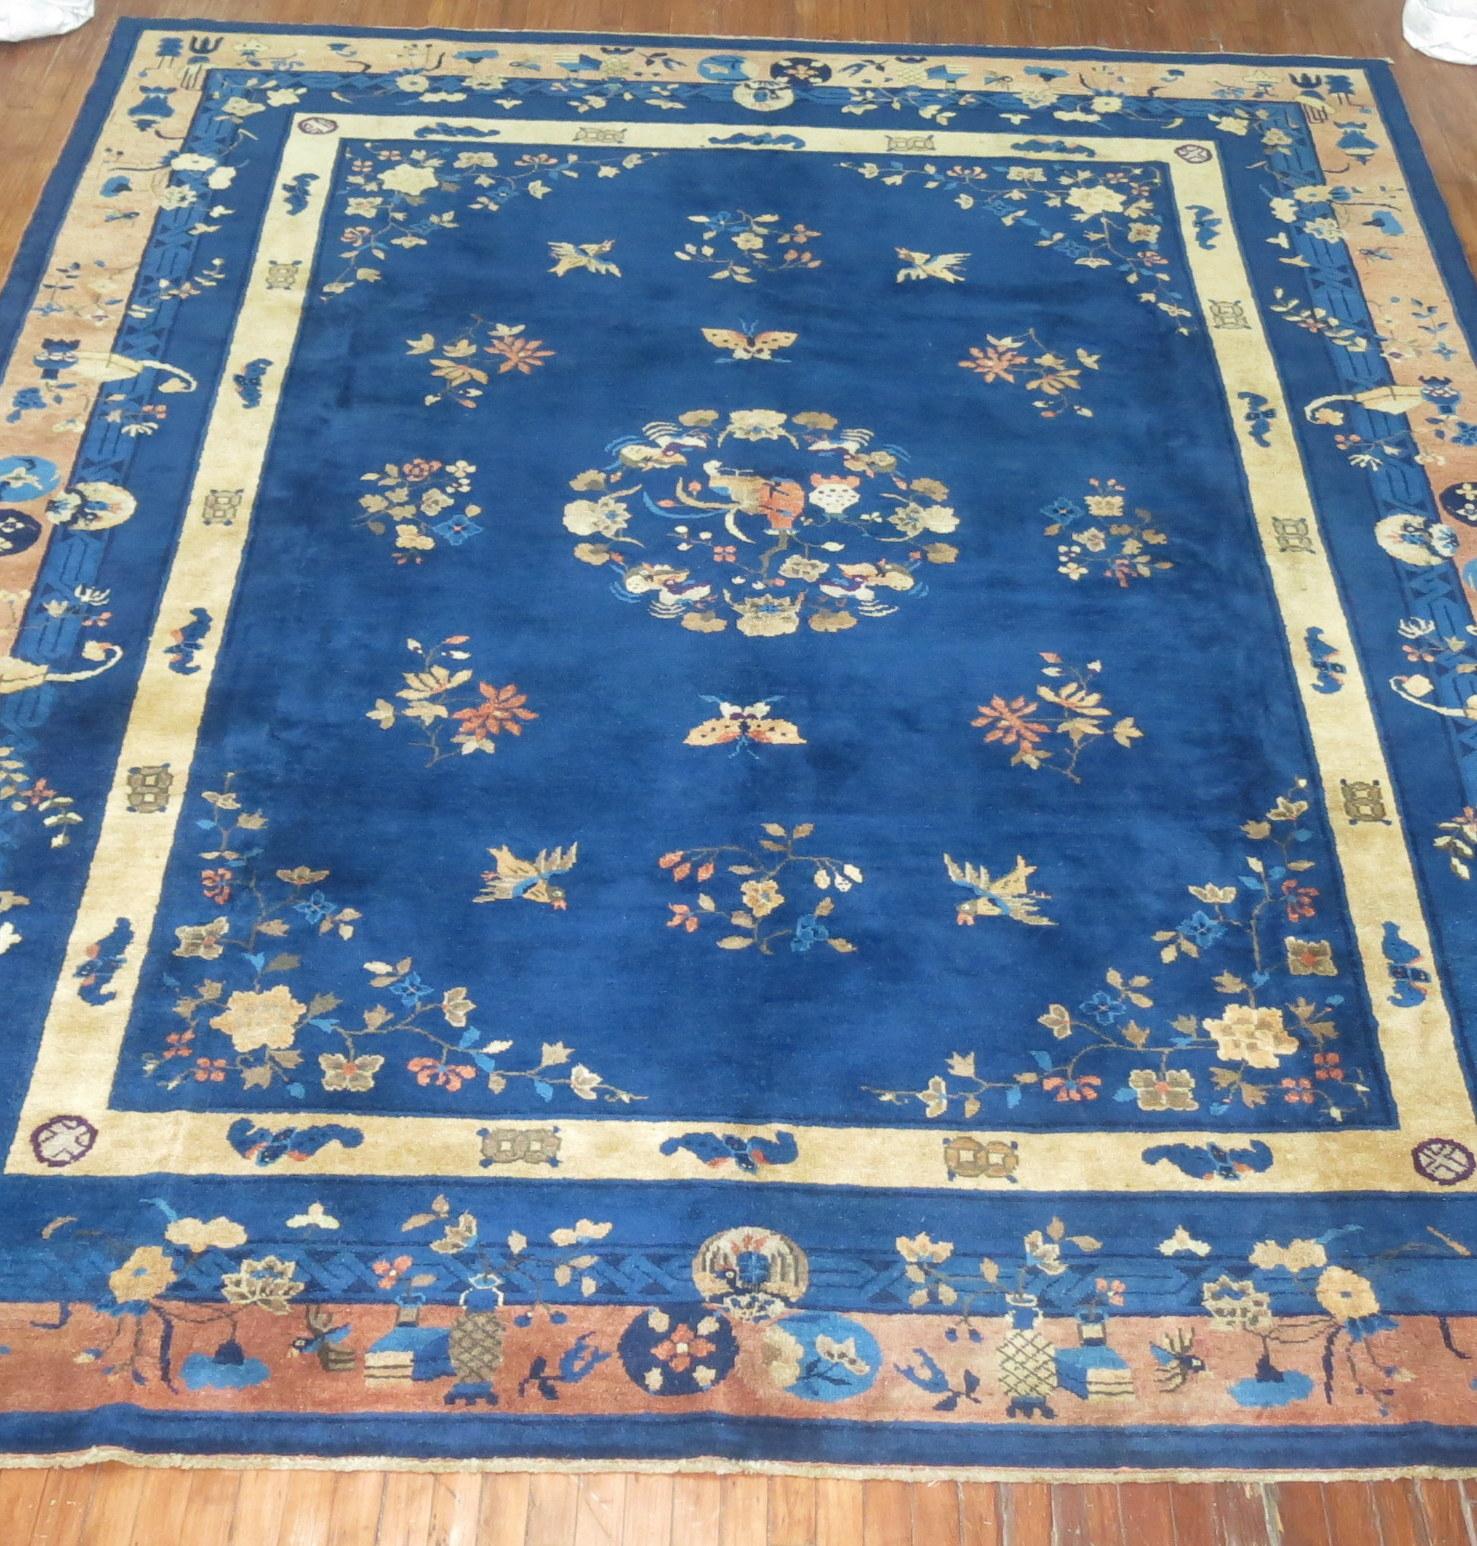 Hand-Woven Antique Chinese Rug